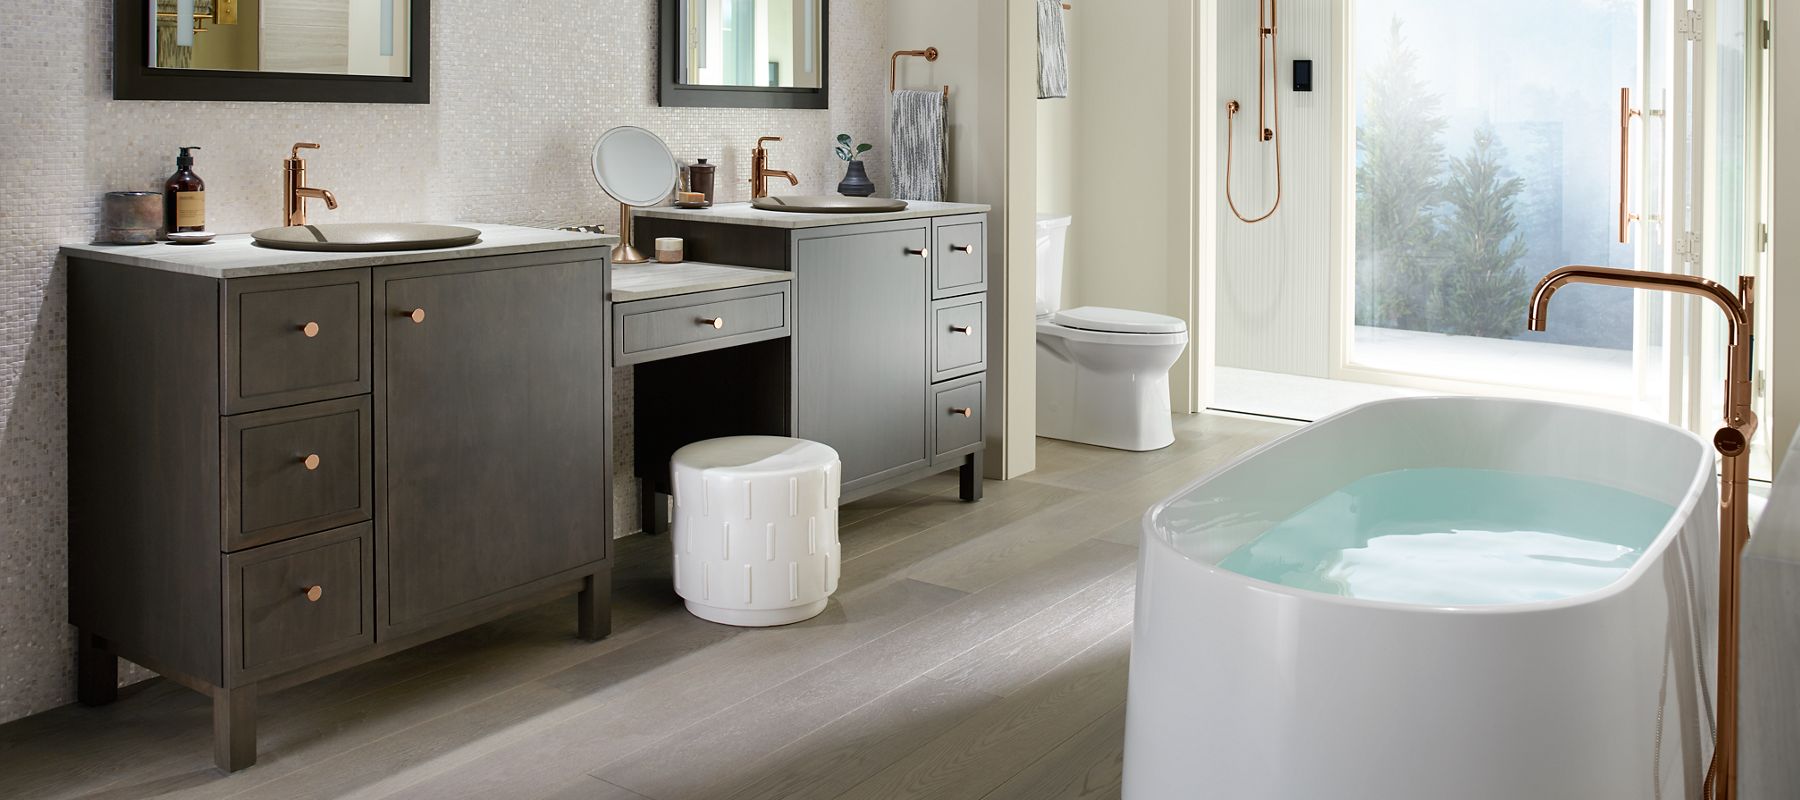 KOHLER Toilets Showers Sinks Faucets And More For Bathroom